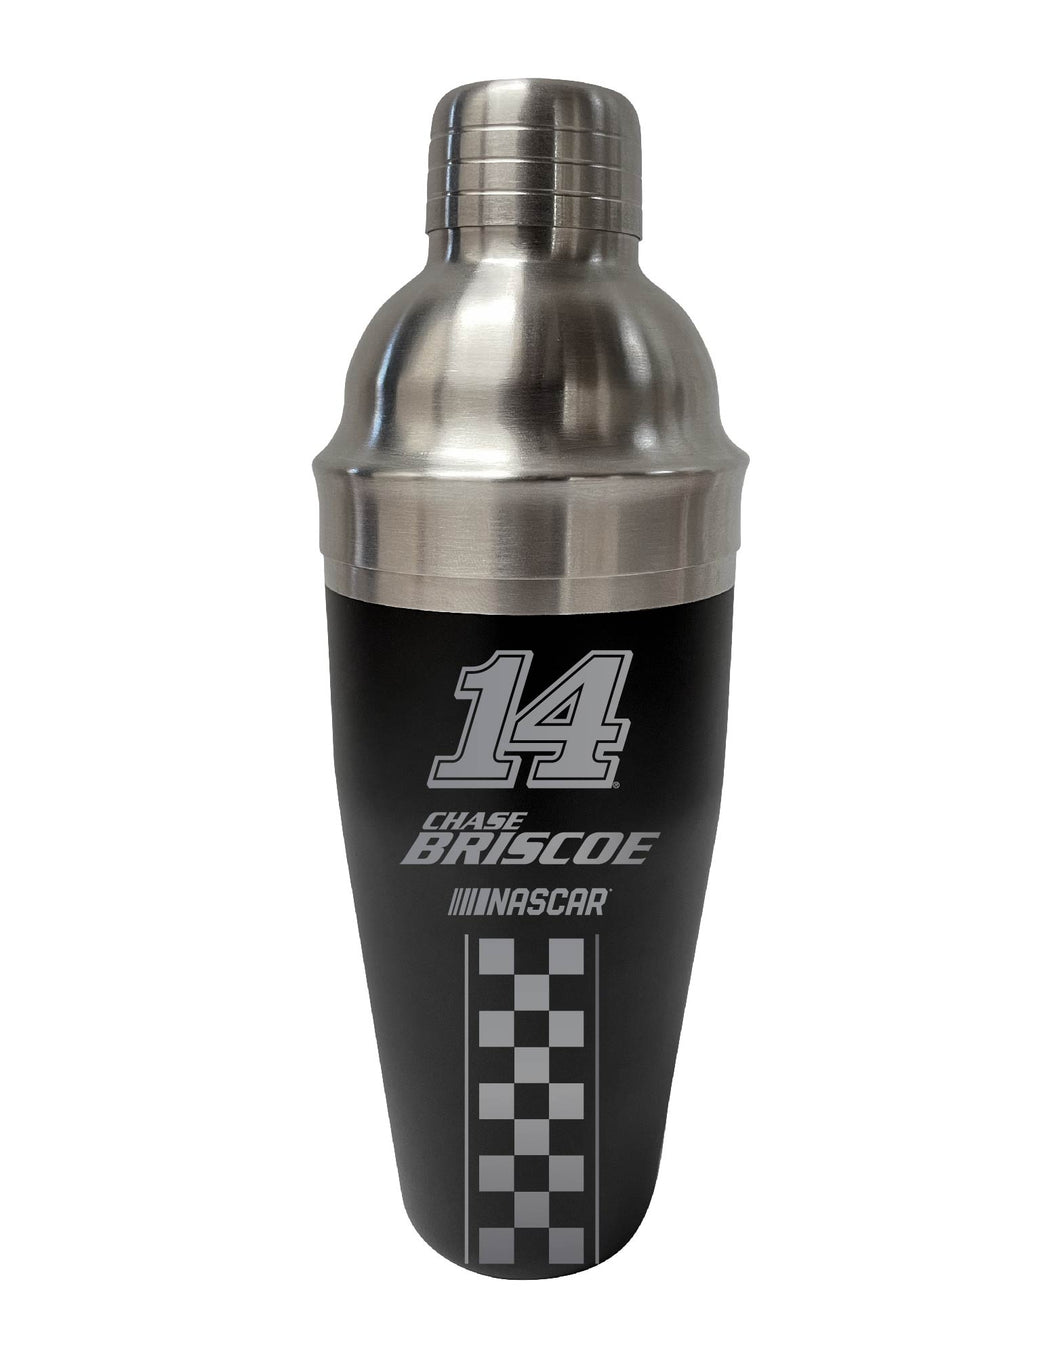 #14 Chase Briscoe NASCAR Officially Licensed Cocktail Shaker